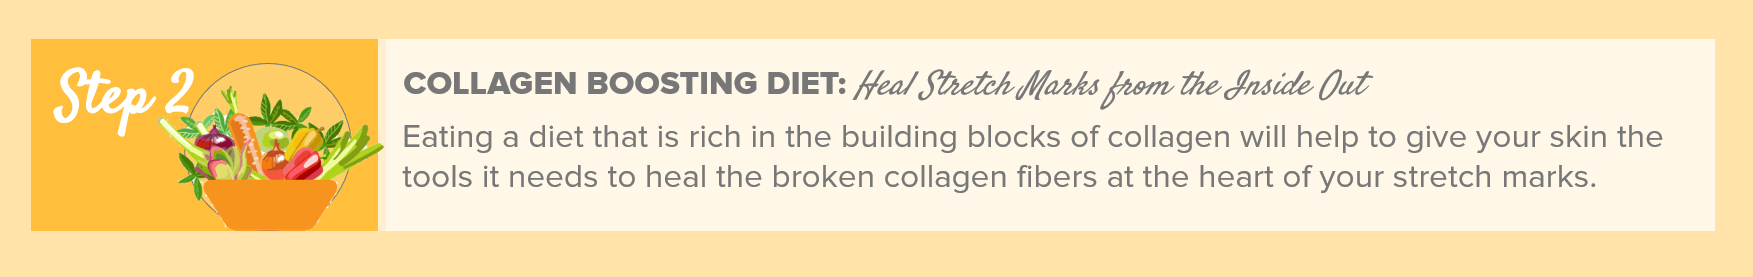 how-to-get-rid-of-stretch-marks-naturally-step-2-collagen-boosting-diet-min